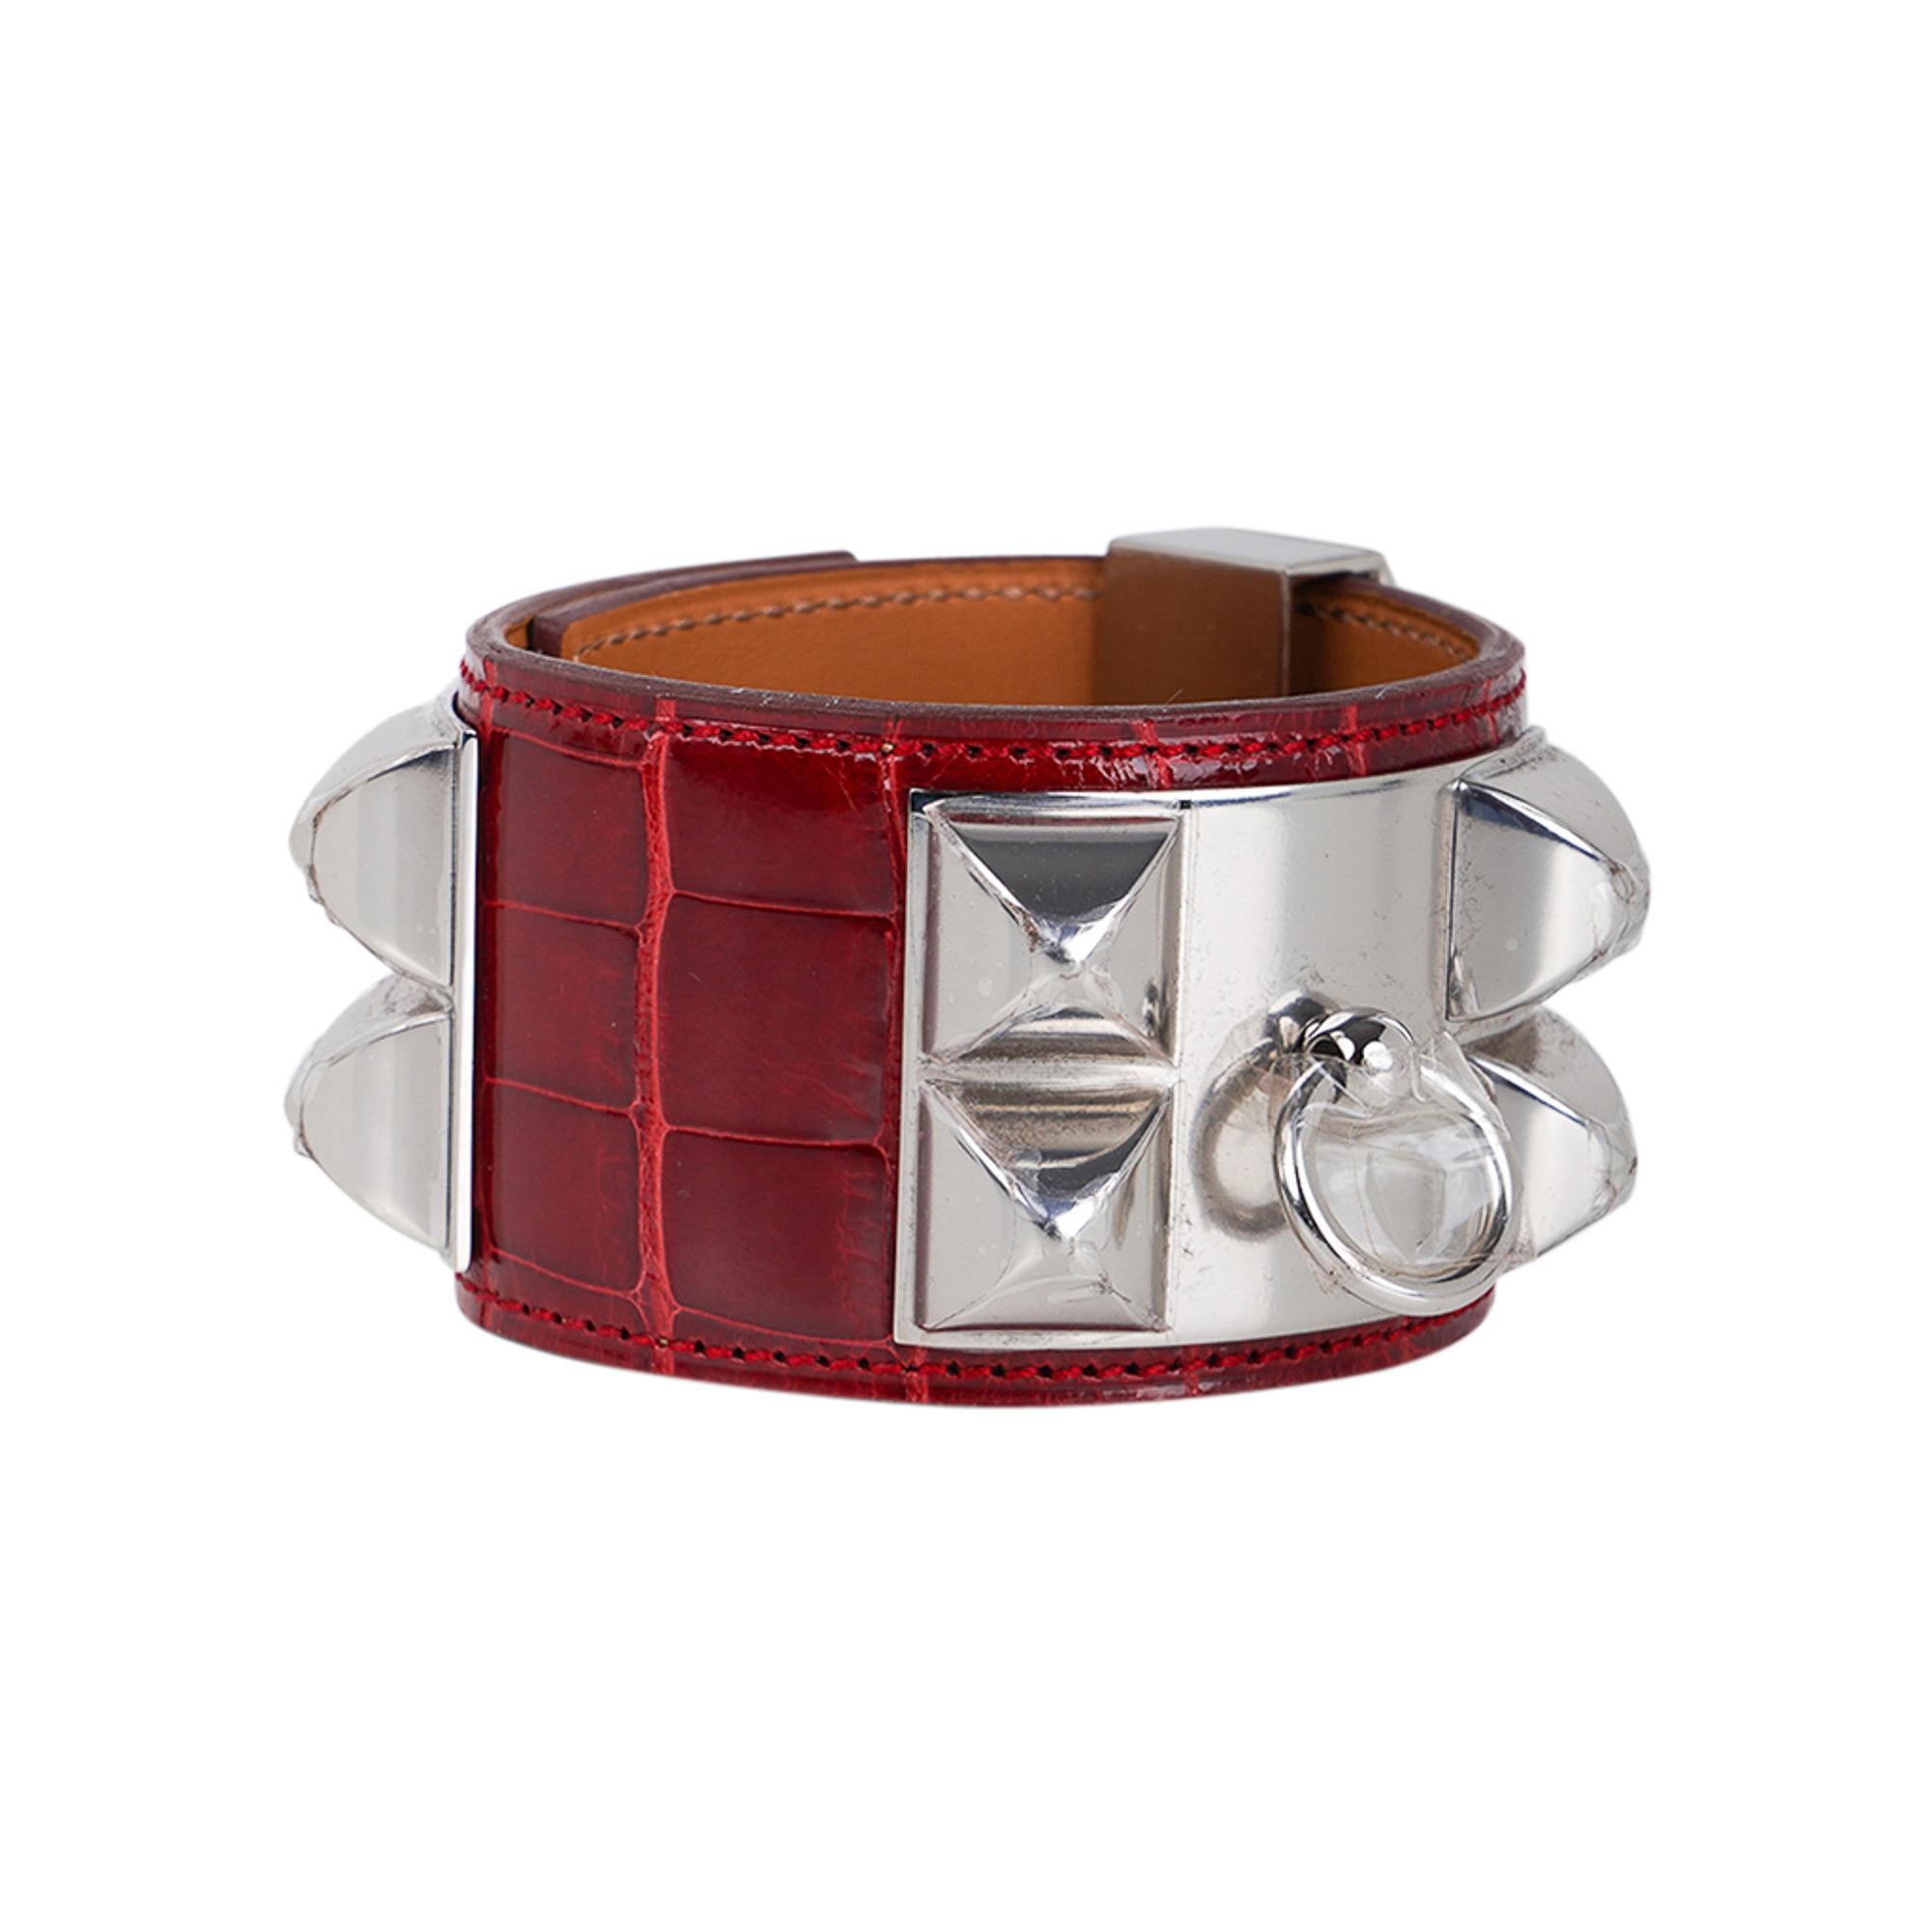 Hermes Collier de Chien CDC bracelet featured in Rouge Alligator.
Accentuated with Palladium hardware.
The chic and instantly recognizable Hermes iconic cuff bracelet.
This fabulous bold statement cuff is timeless and perfect to dress up or